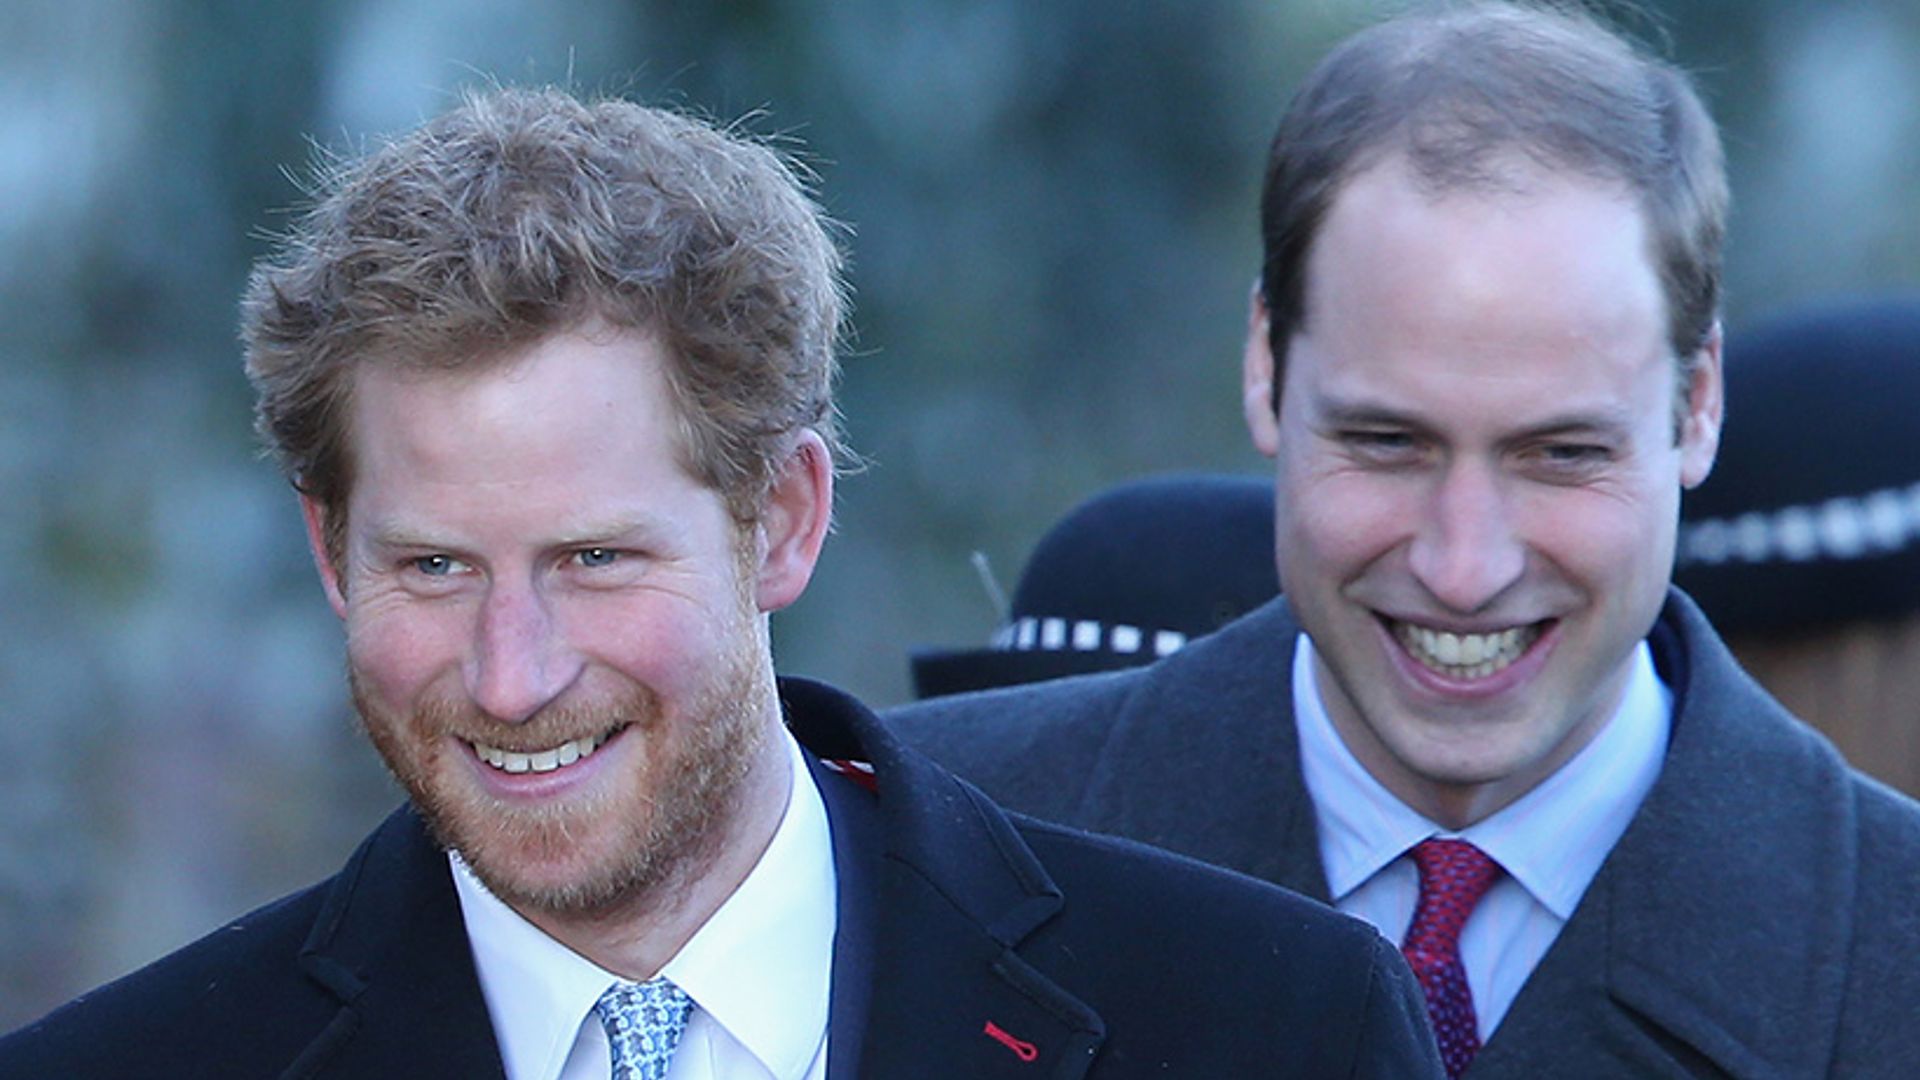 Prince William had the best response when he was asked for Prince Harry's phone number...